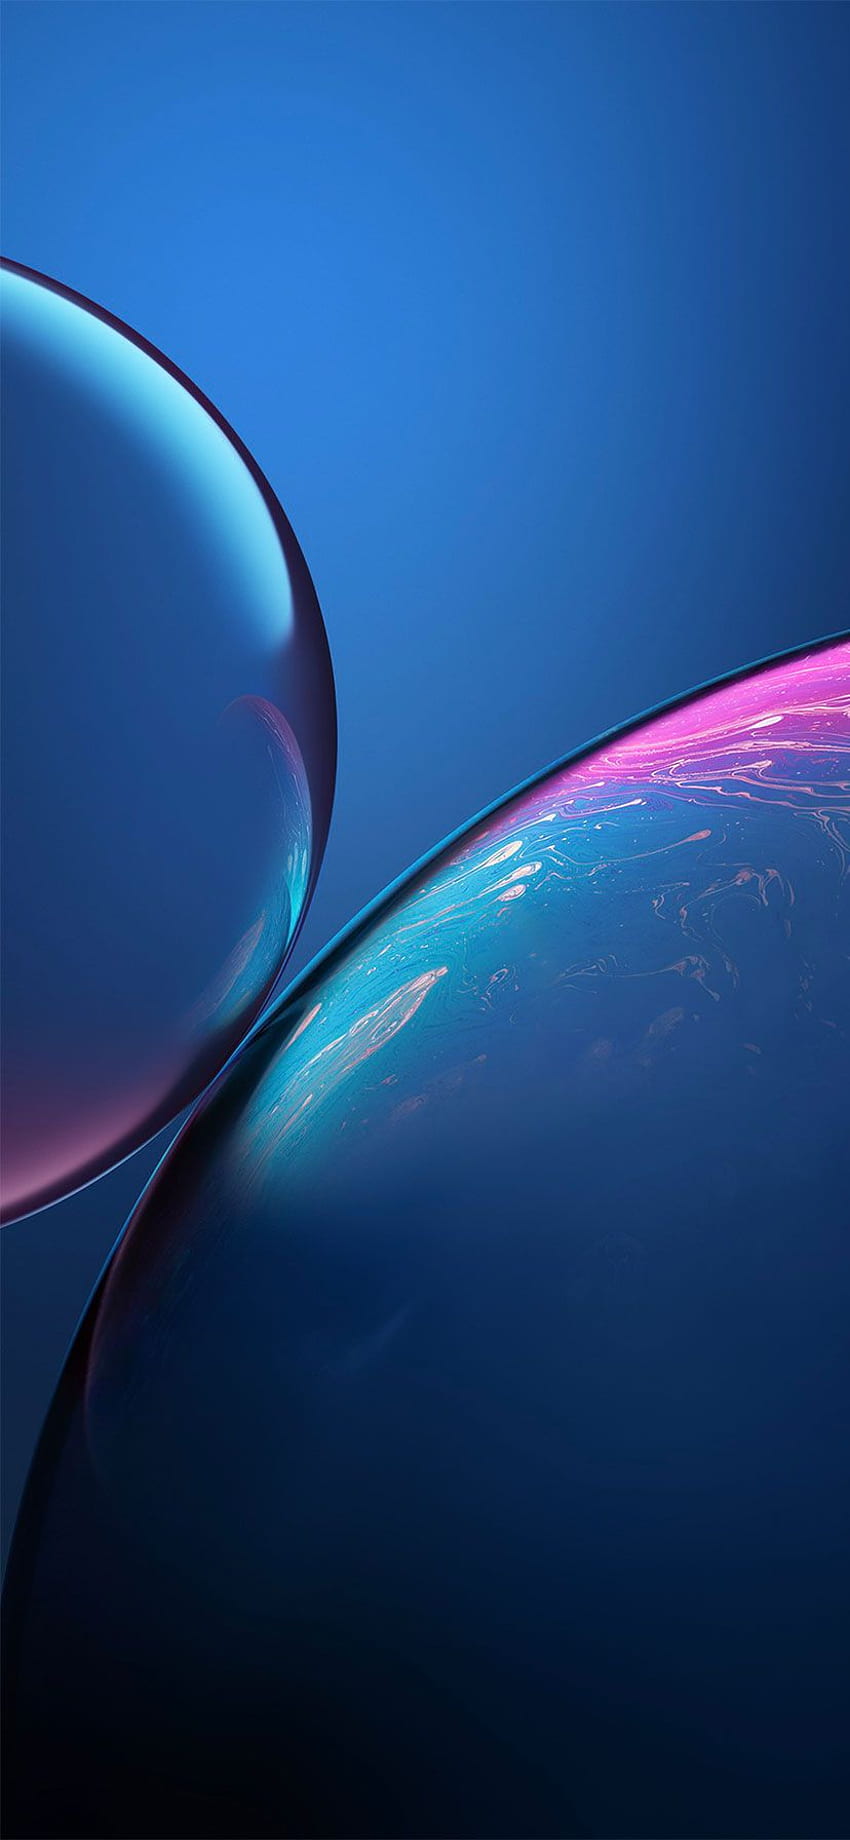 5705 iPhone XR wallpaper Download Free  Android  iPhone HD Wallpaper  Background Download HD Wallpapers Desktop Background  Android  iPhone  1080p 4k 1080x2337 2023